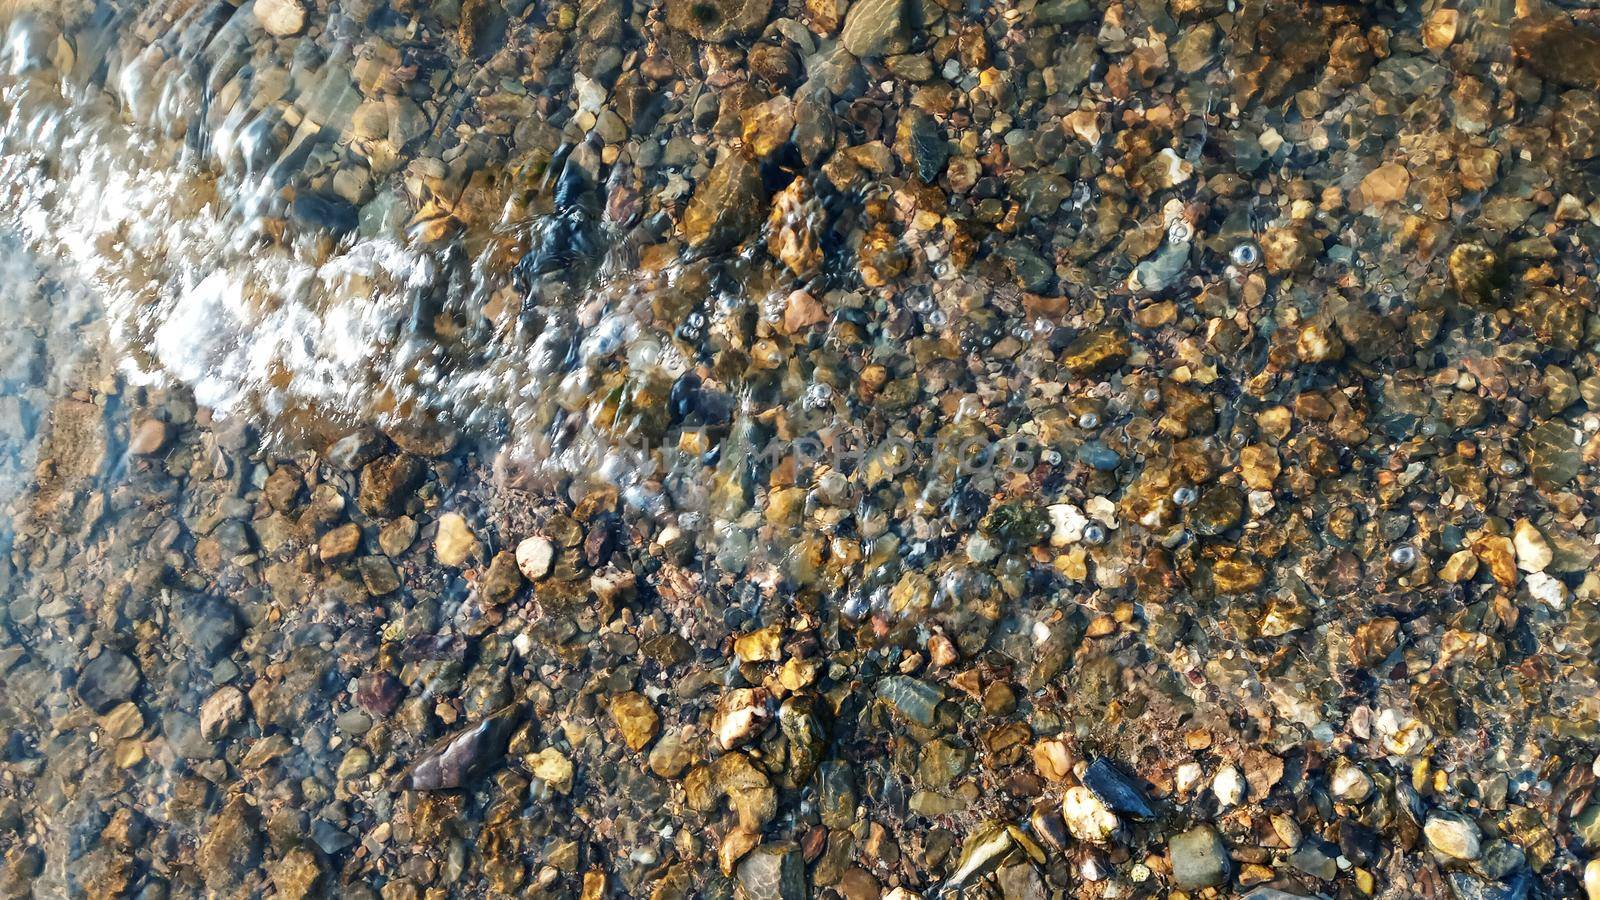 Top view on colorful pebbles covered by water. Close up view of smooth round pebble stones on the beach.